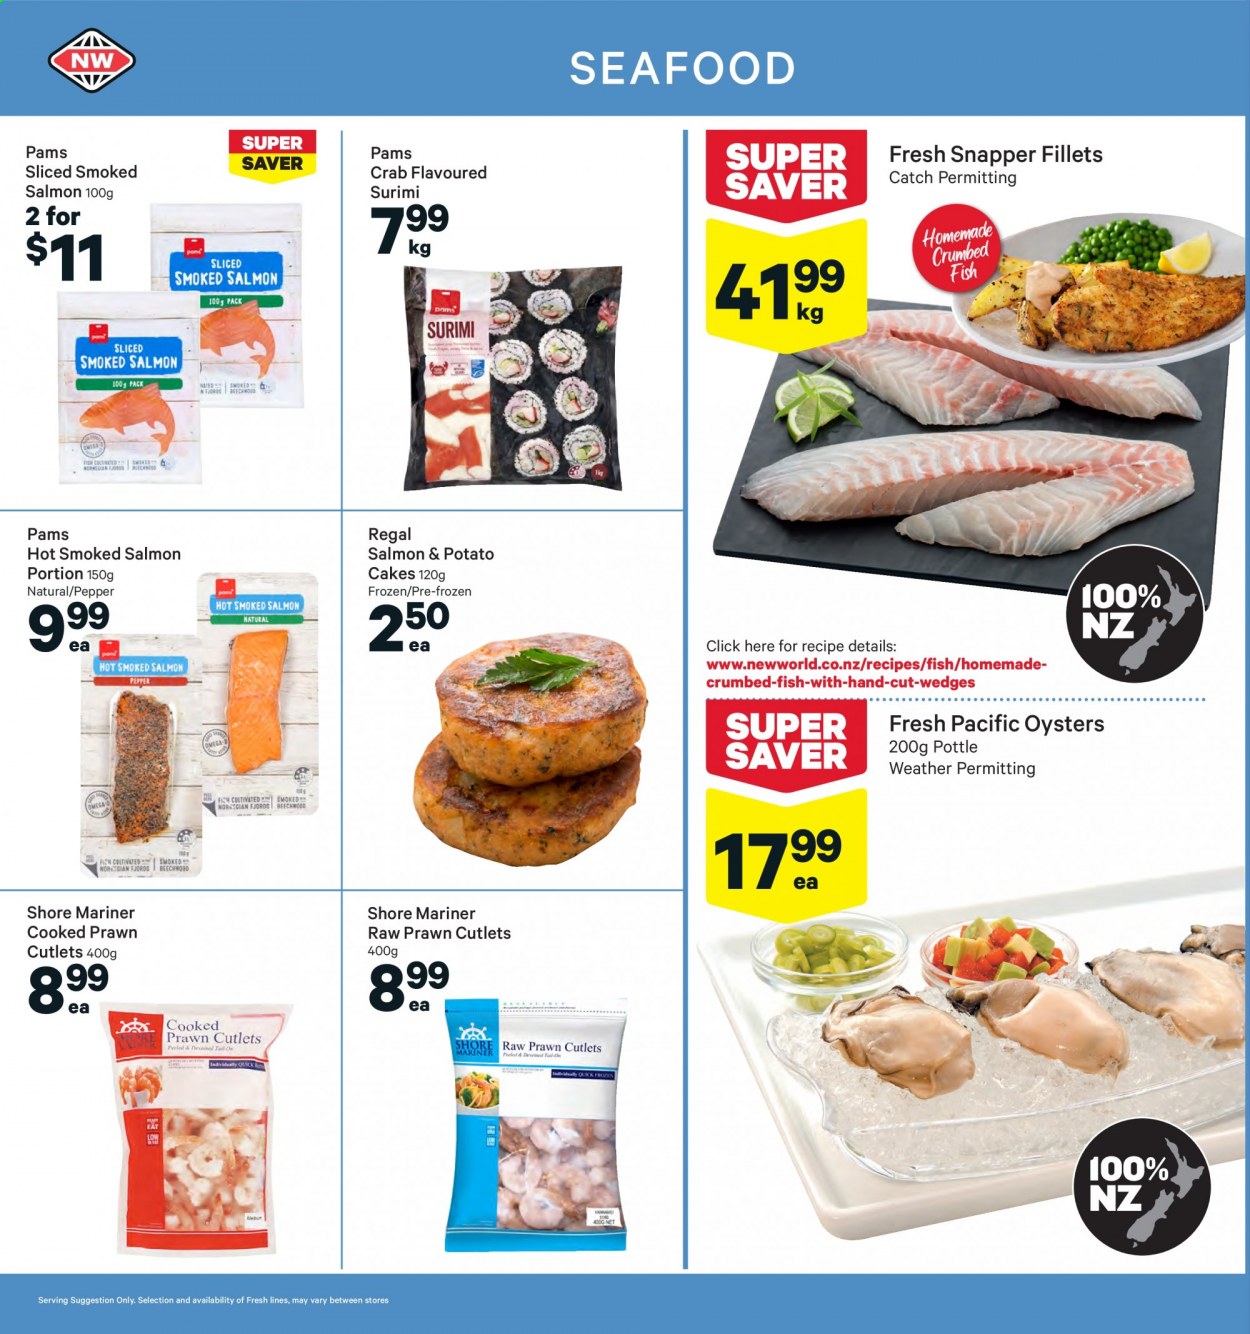 thumbnail - New World mailer - 16.08.2021 - 22.08.2021 - Sales products - cake, salmon, smoked salmon, oysters, seafood, prawns, crab, fish, crumbed fish, Shore Mariner, pepper. Page 8.